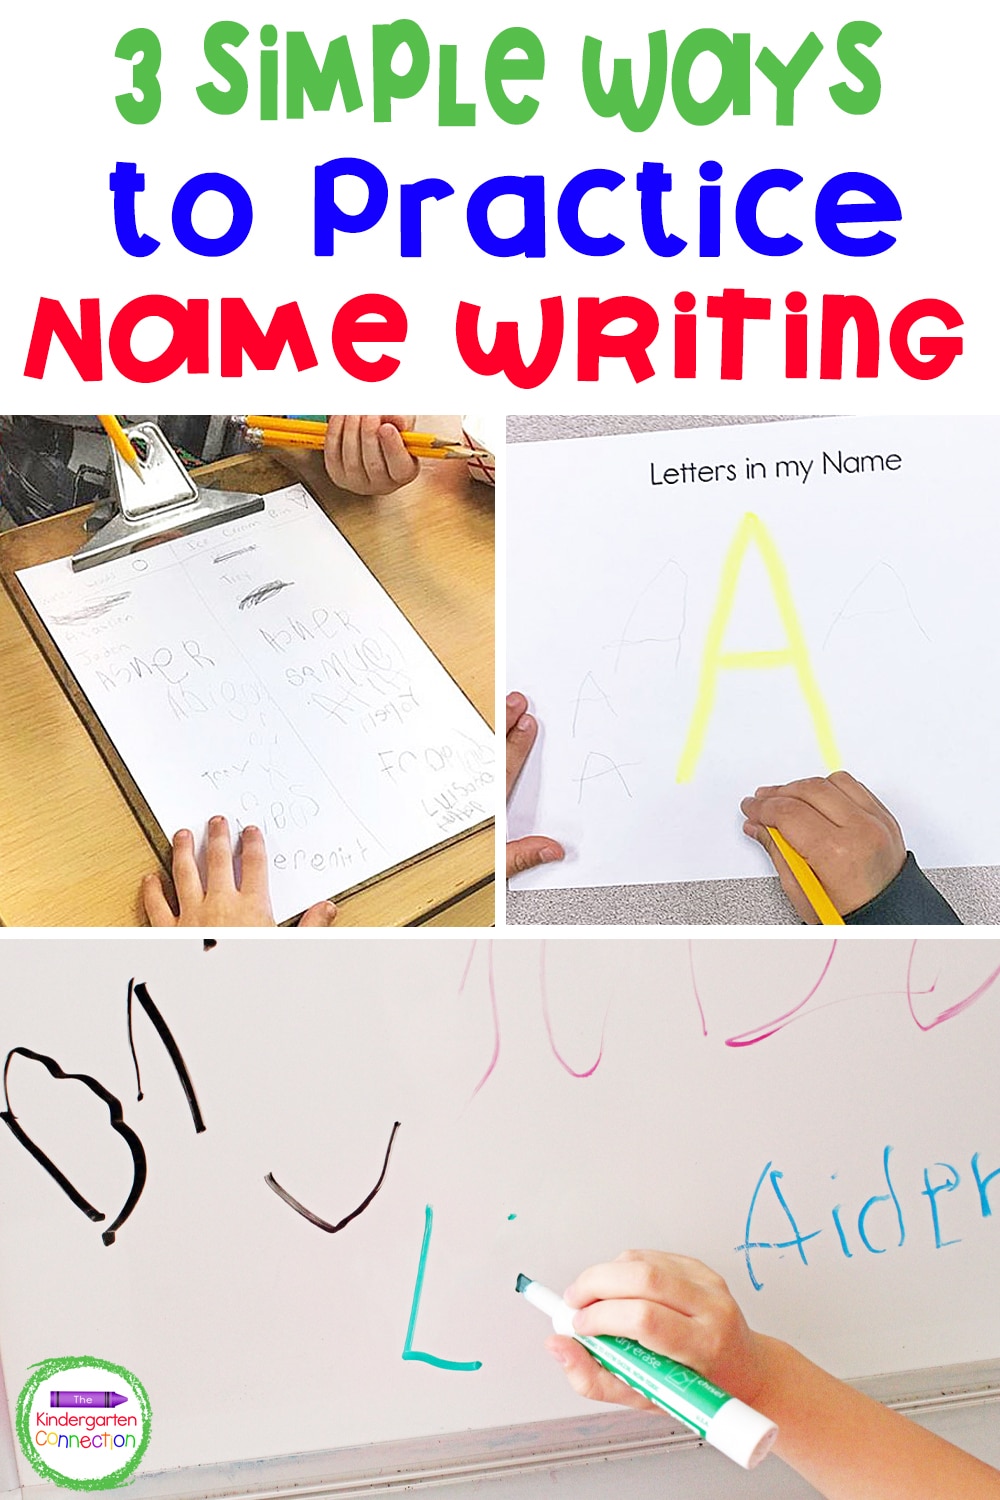 Make name writing practice fun and engaging with these 3 simple ways to practice name writing in Pre-K, TK, and Kindergarten!